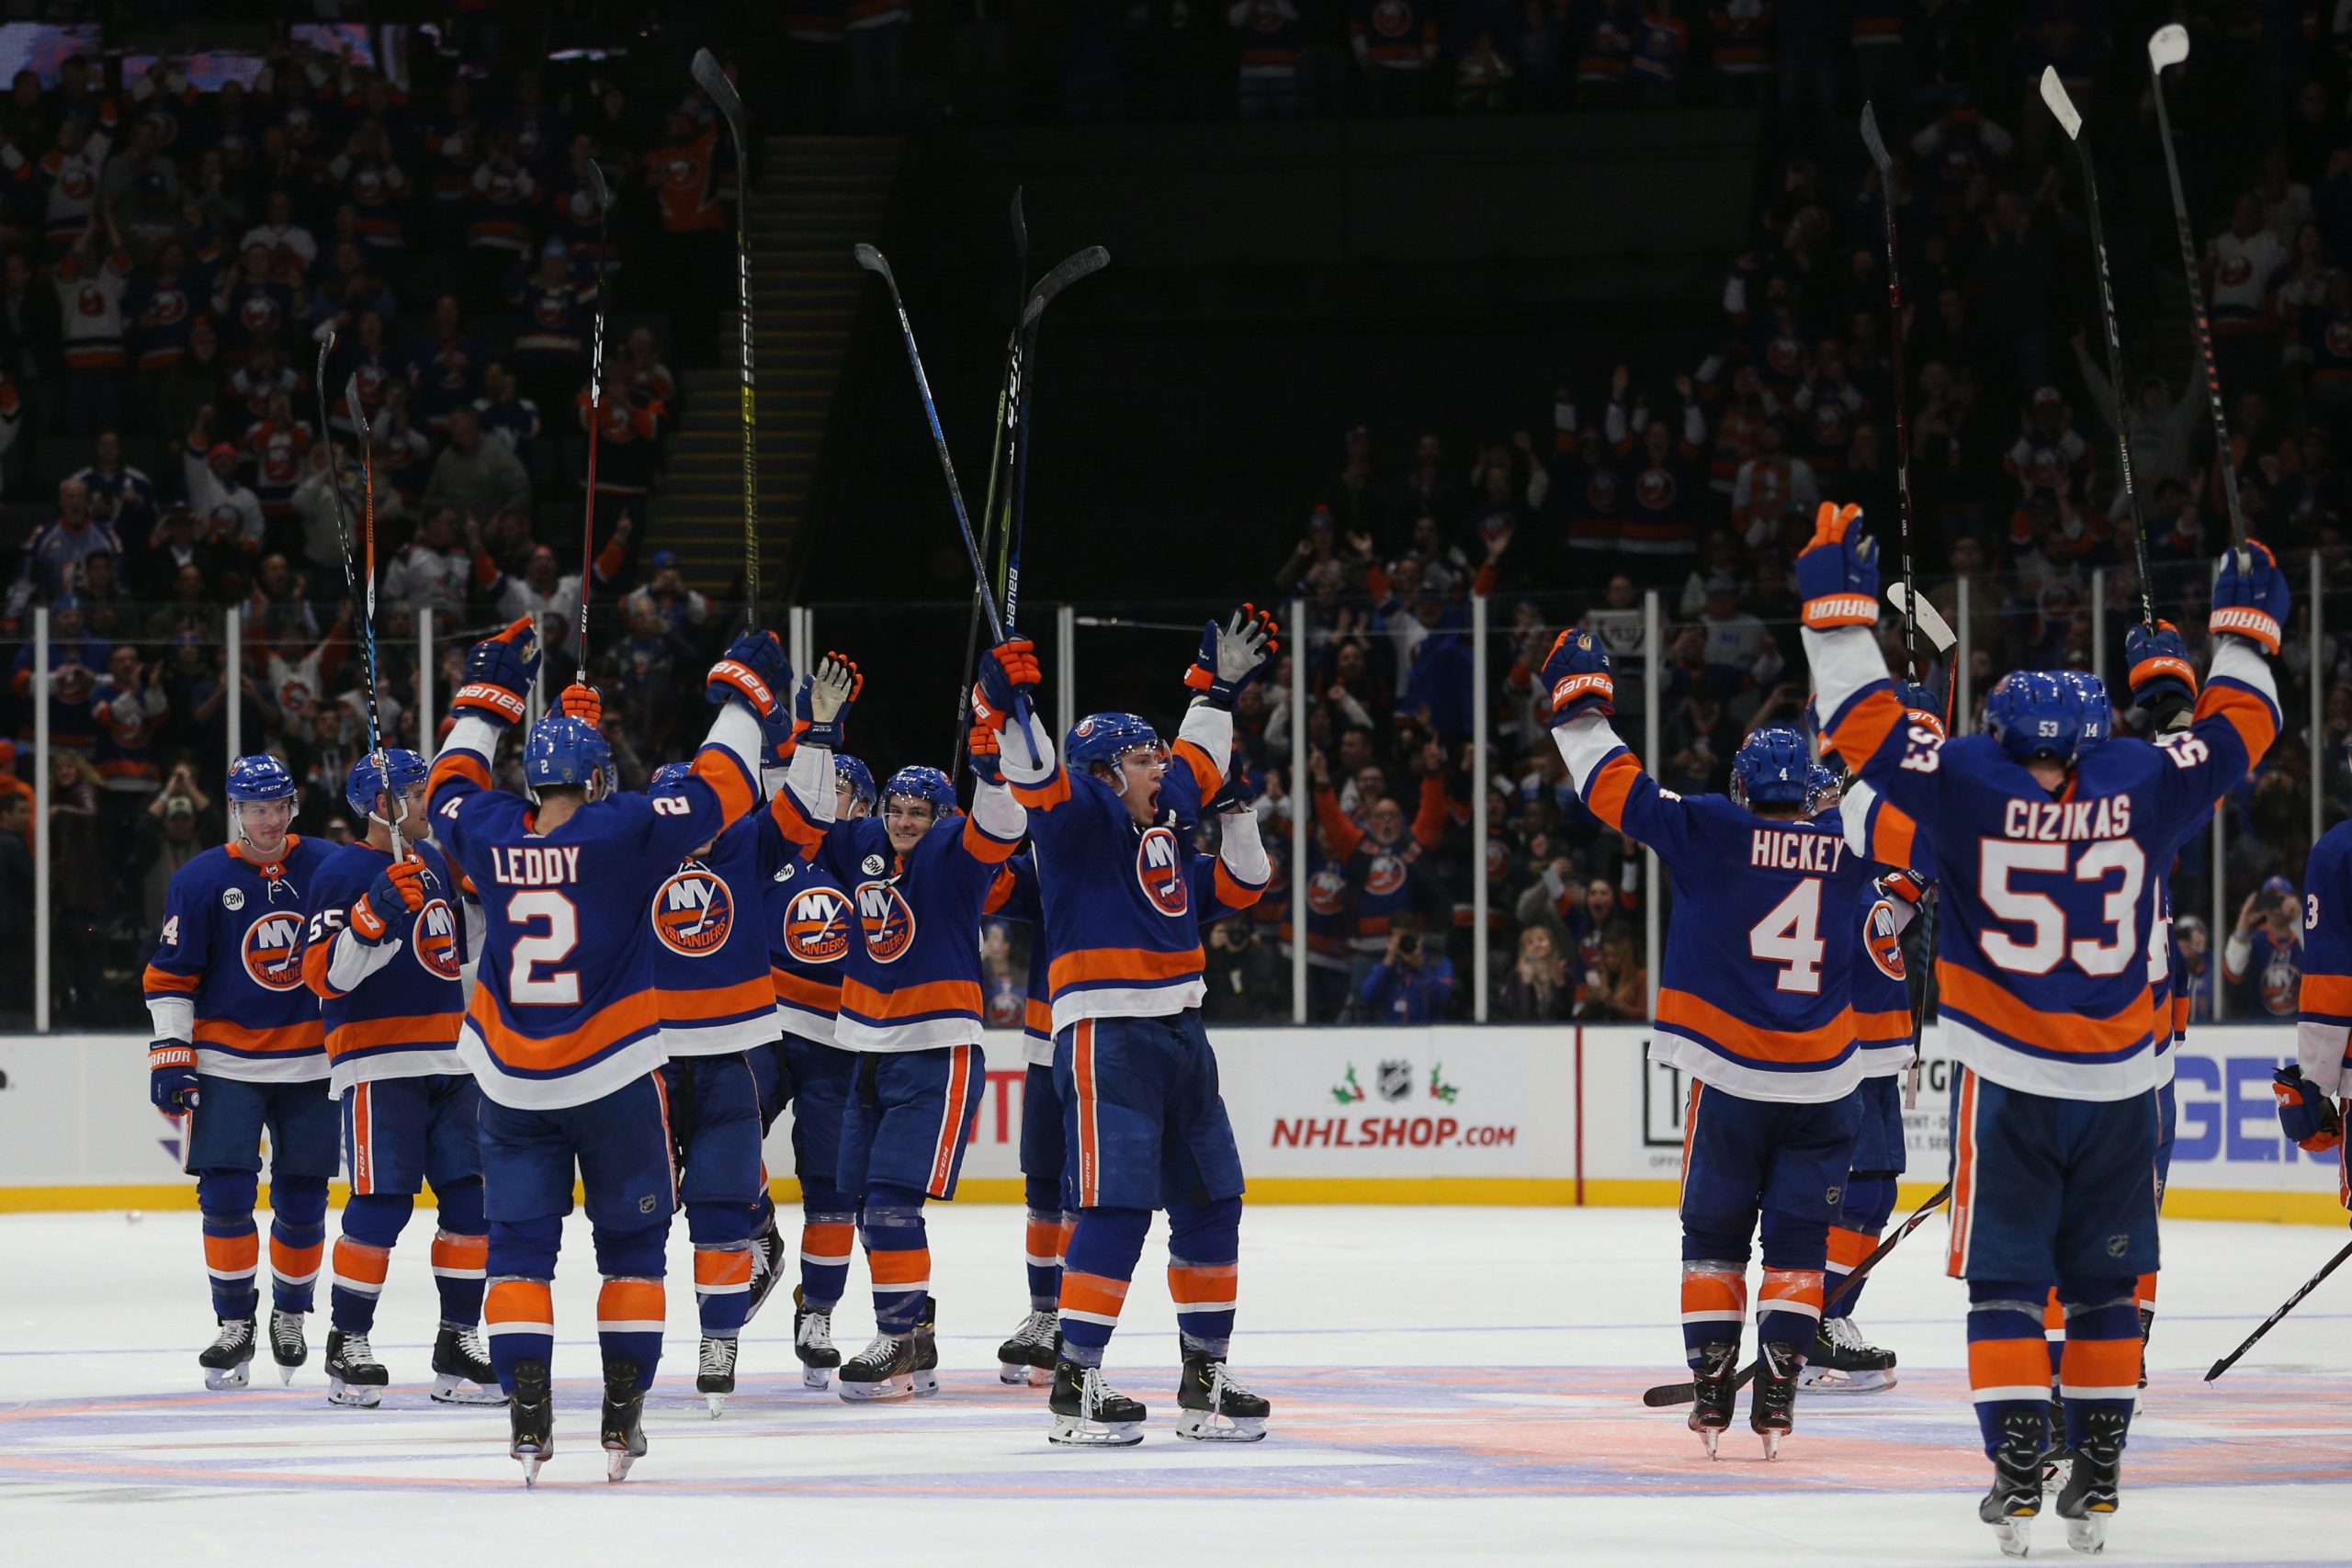 Dec 1, 2018; Uniondale, NY, USA; The New York Islanders acknowledge their fans after defeating the Columbus Blue Jackets at Nassau Veterans Memorial Coliseum. Mandatory Credit: Brad Penner-USA TODAY Sports